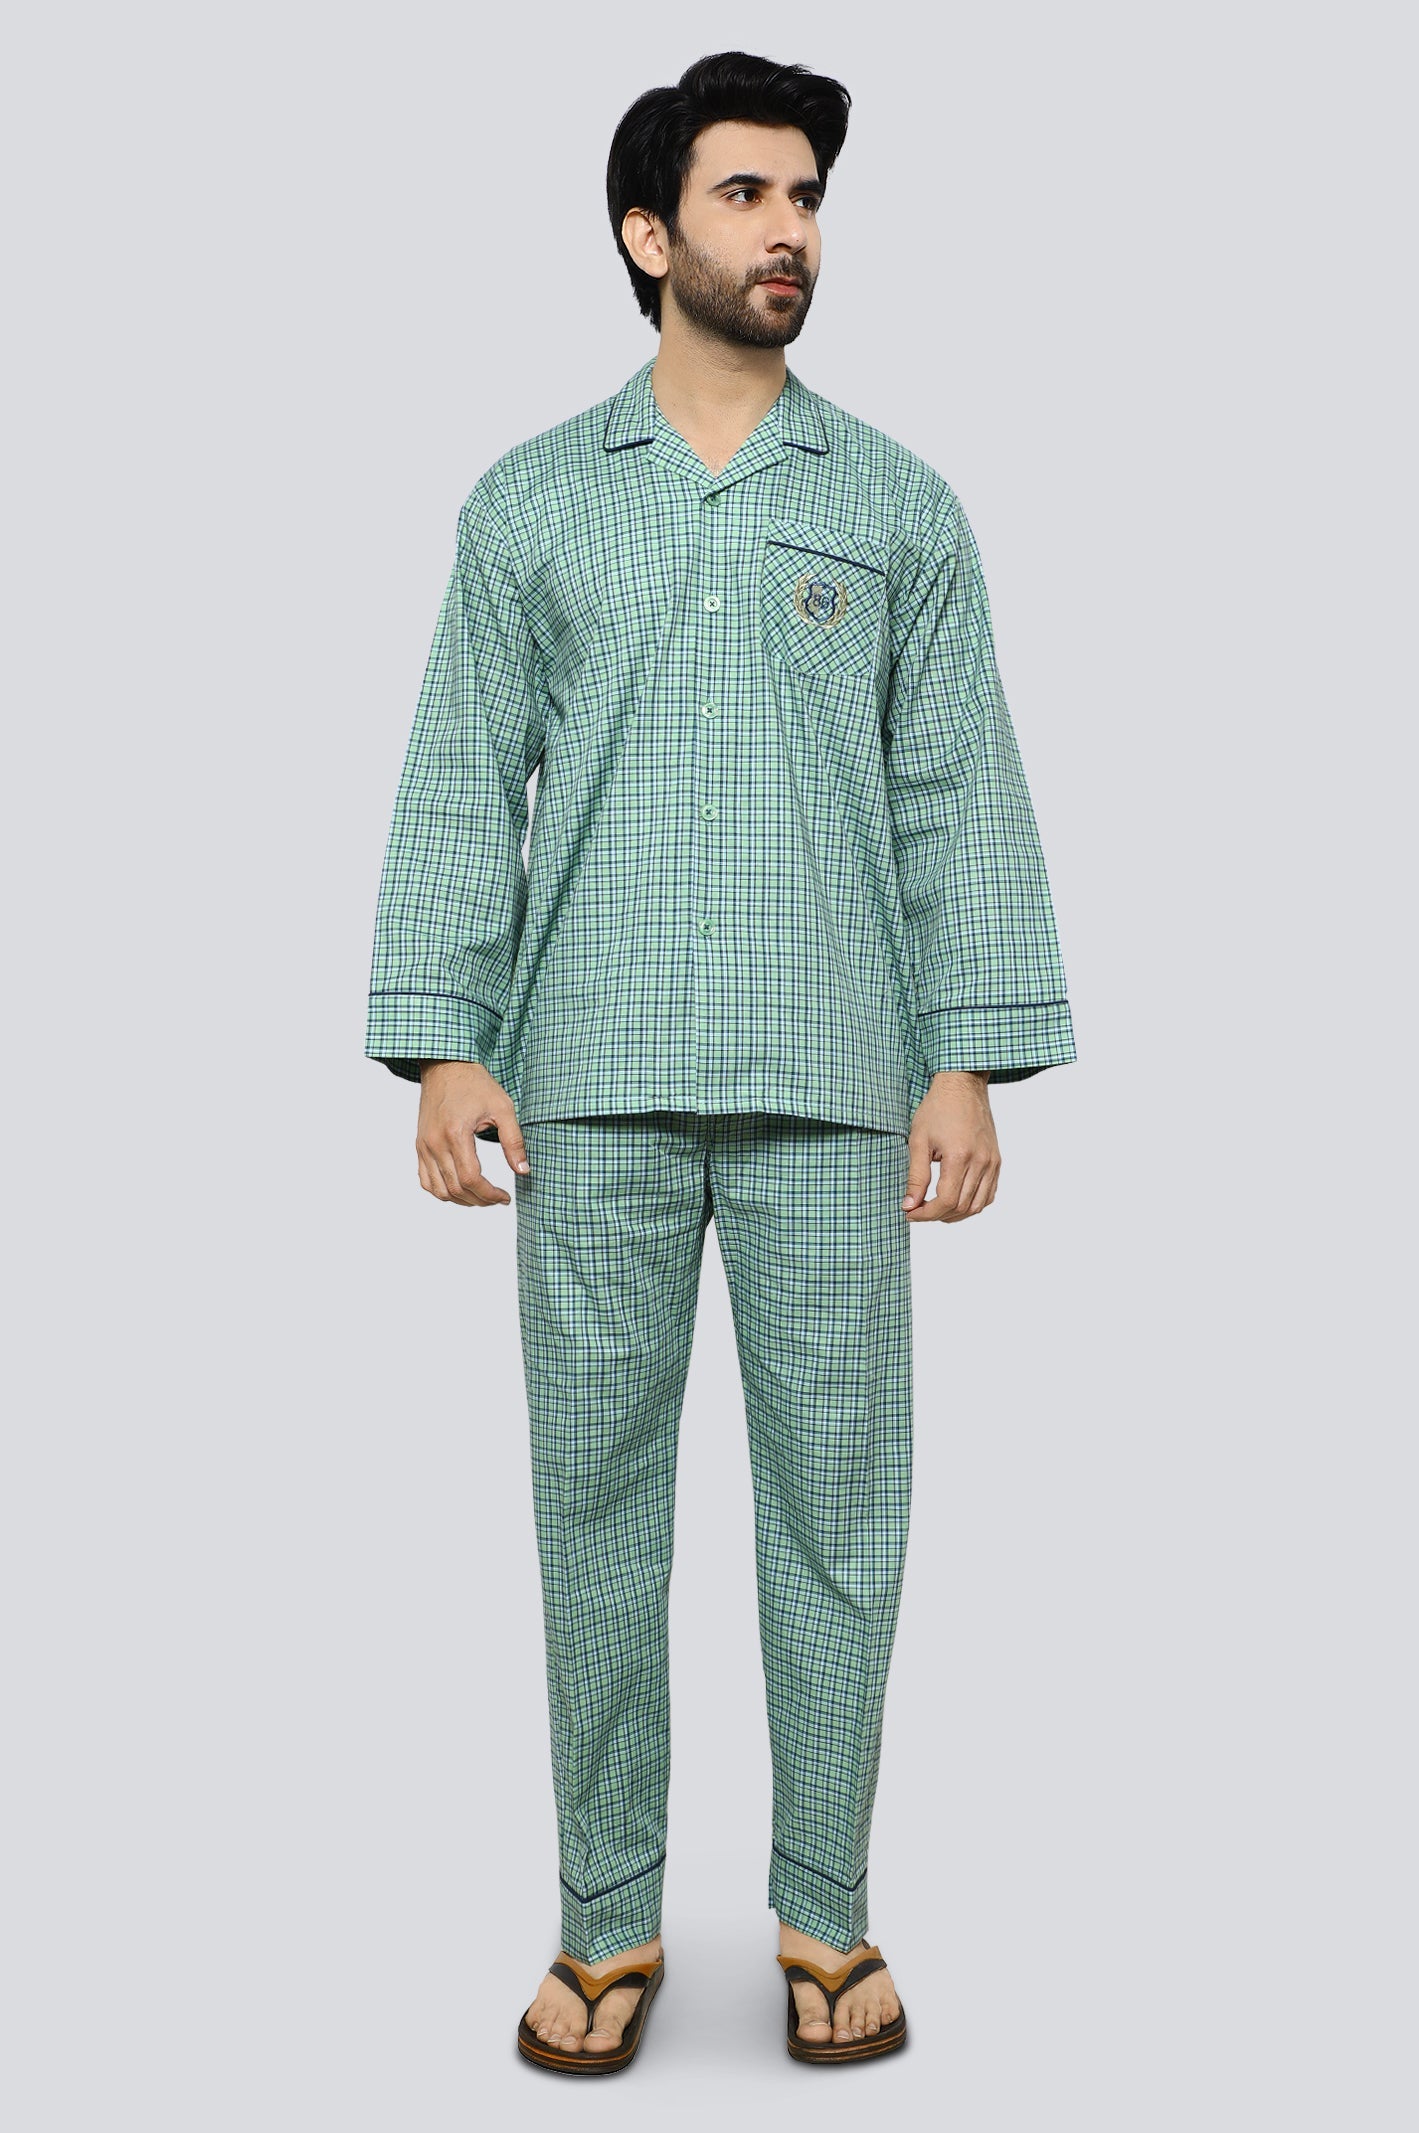 Diner's Night Suit for Men SKU: FNS020-GREEN - Diners